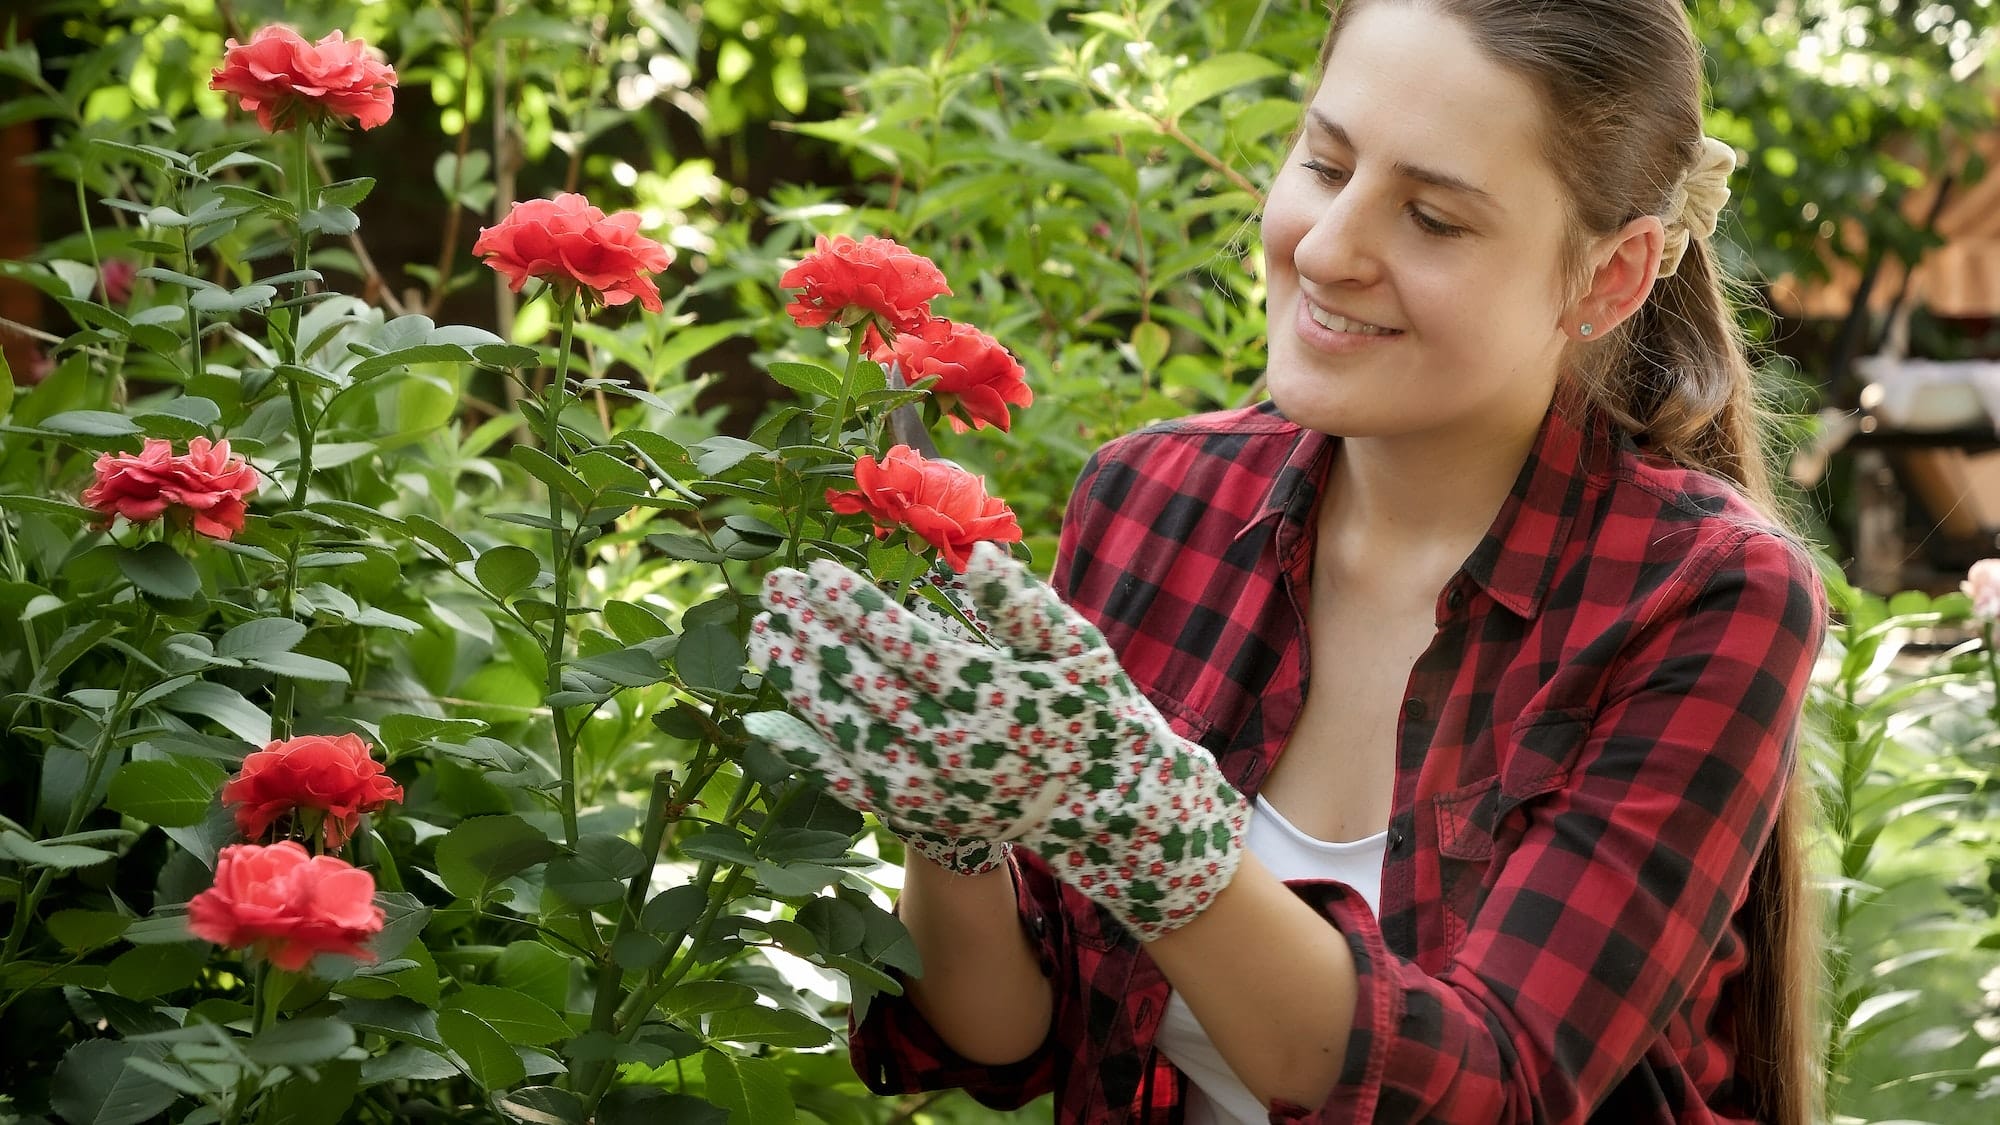 Portrait of smiling young woman working in garden. Cutting dead leaves and removing rose petals